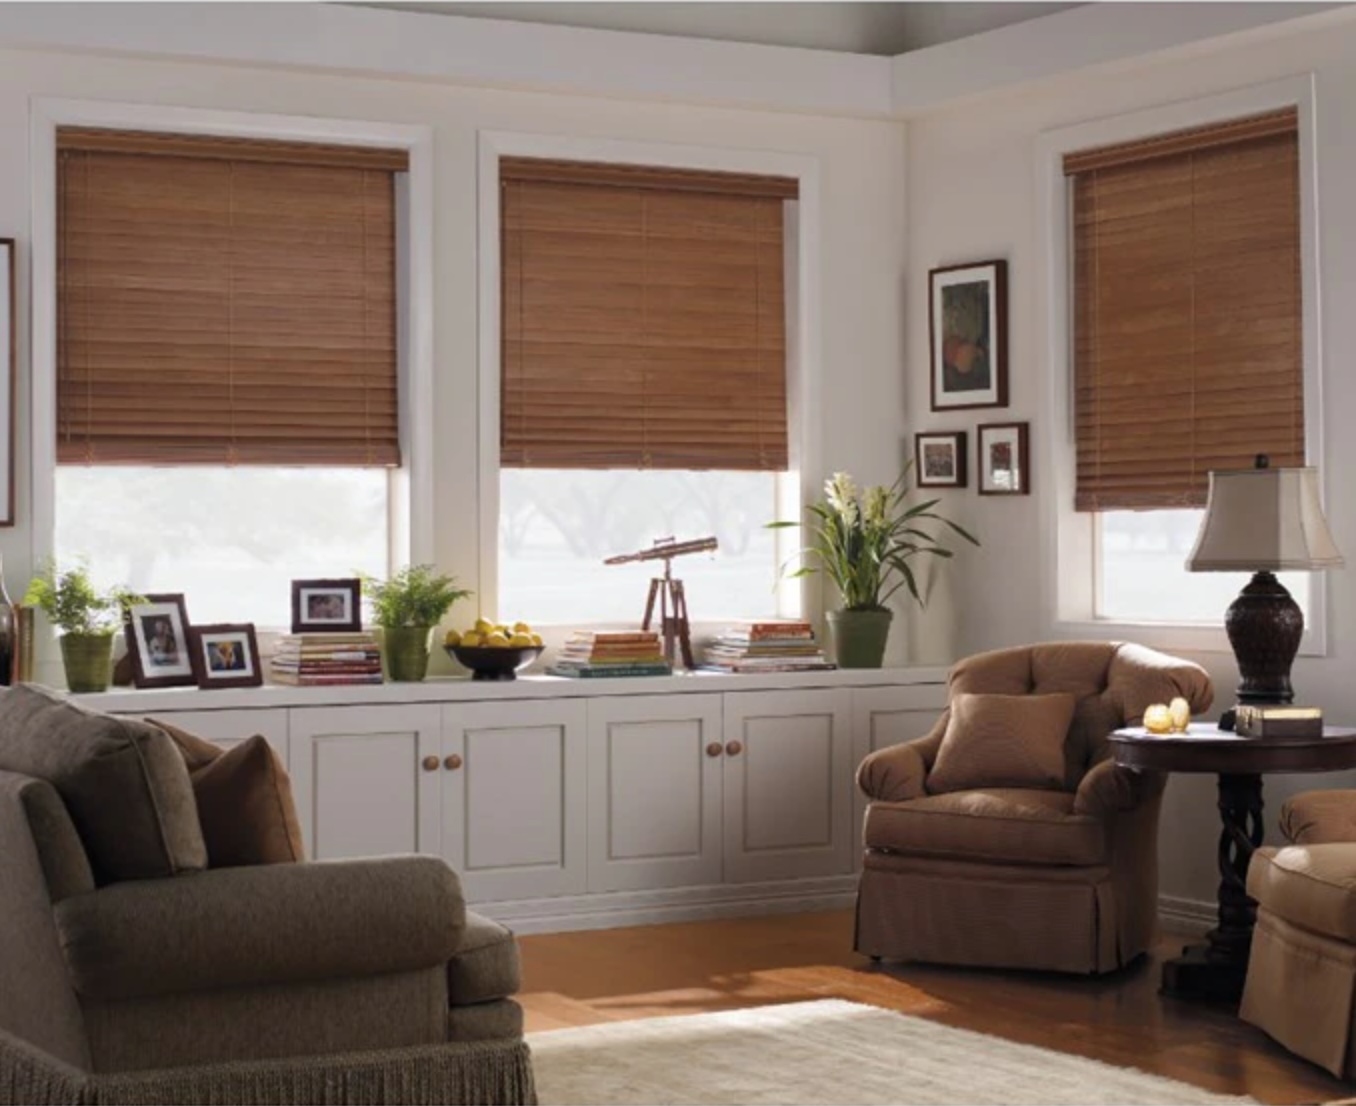 Levolor 2-Inch Real Wood Blinds (in Estate Autumn) Are Partially Raised in a Living Space